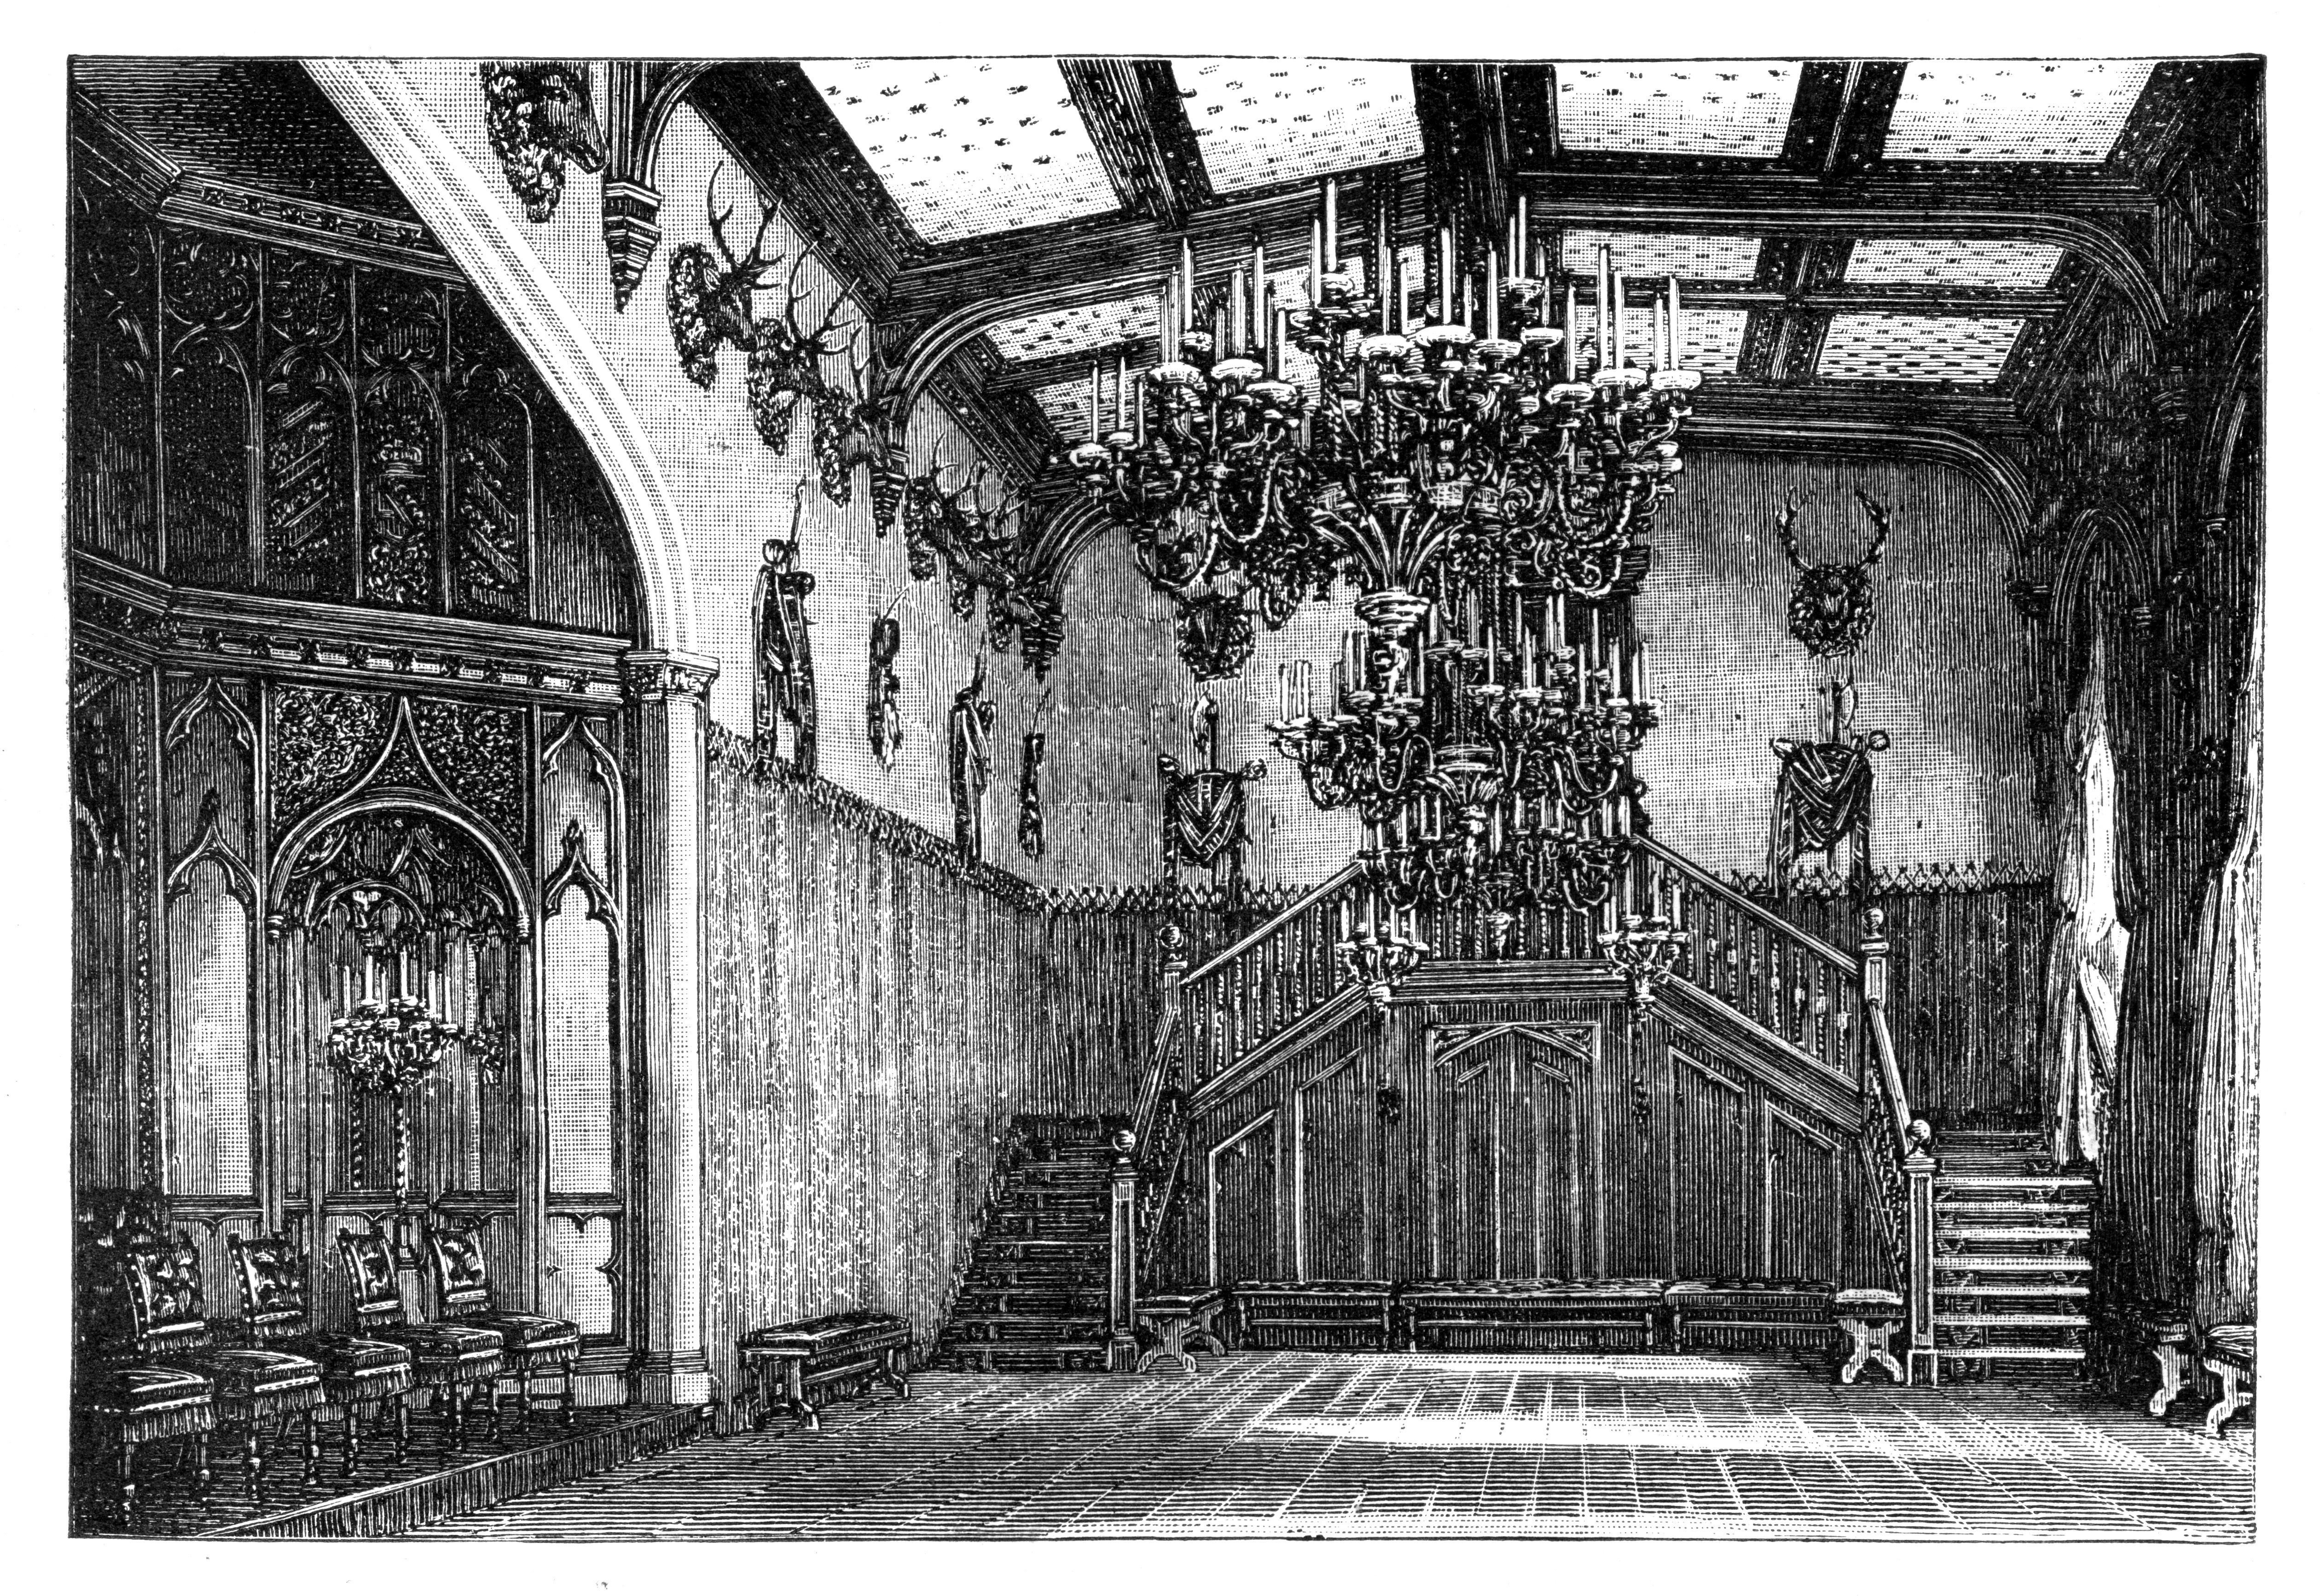 The Ballroom, Balmoral Castle, Scotland. Illustration from The Life & Times of Queen Victoria, by Robert Wilson, Vol III | Source: Getty Images